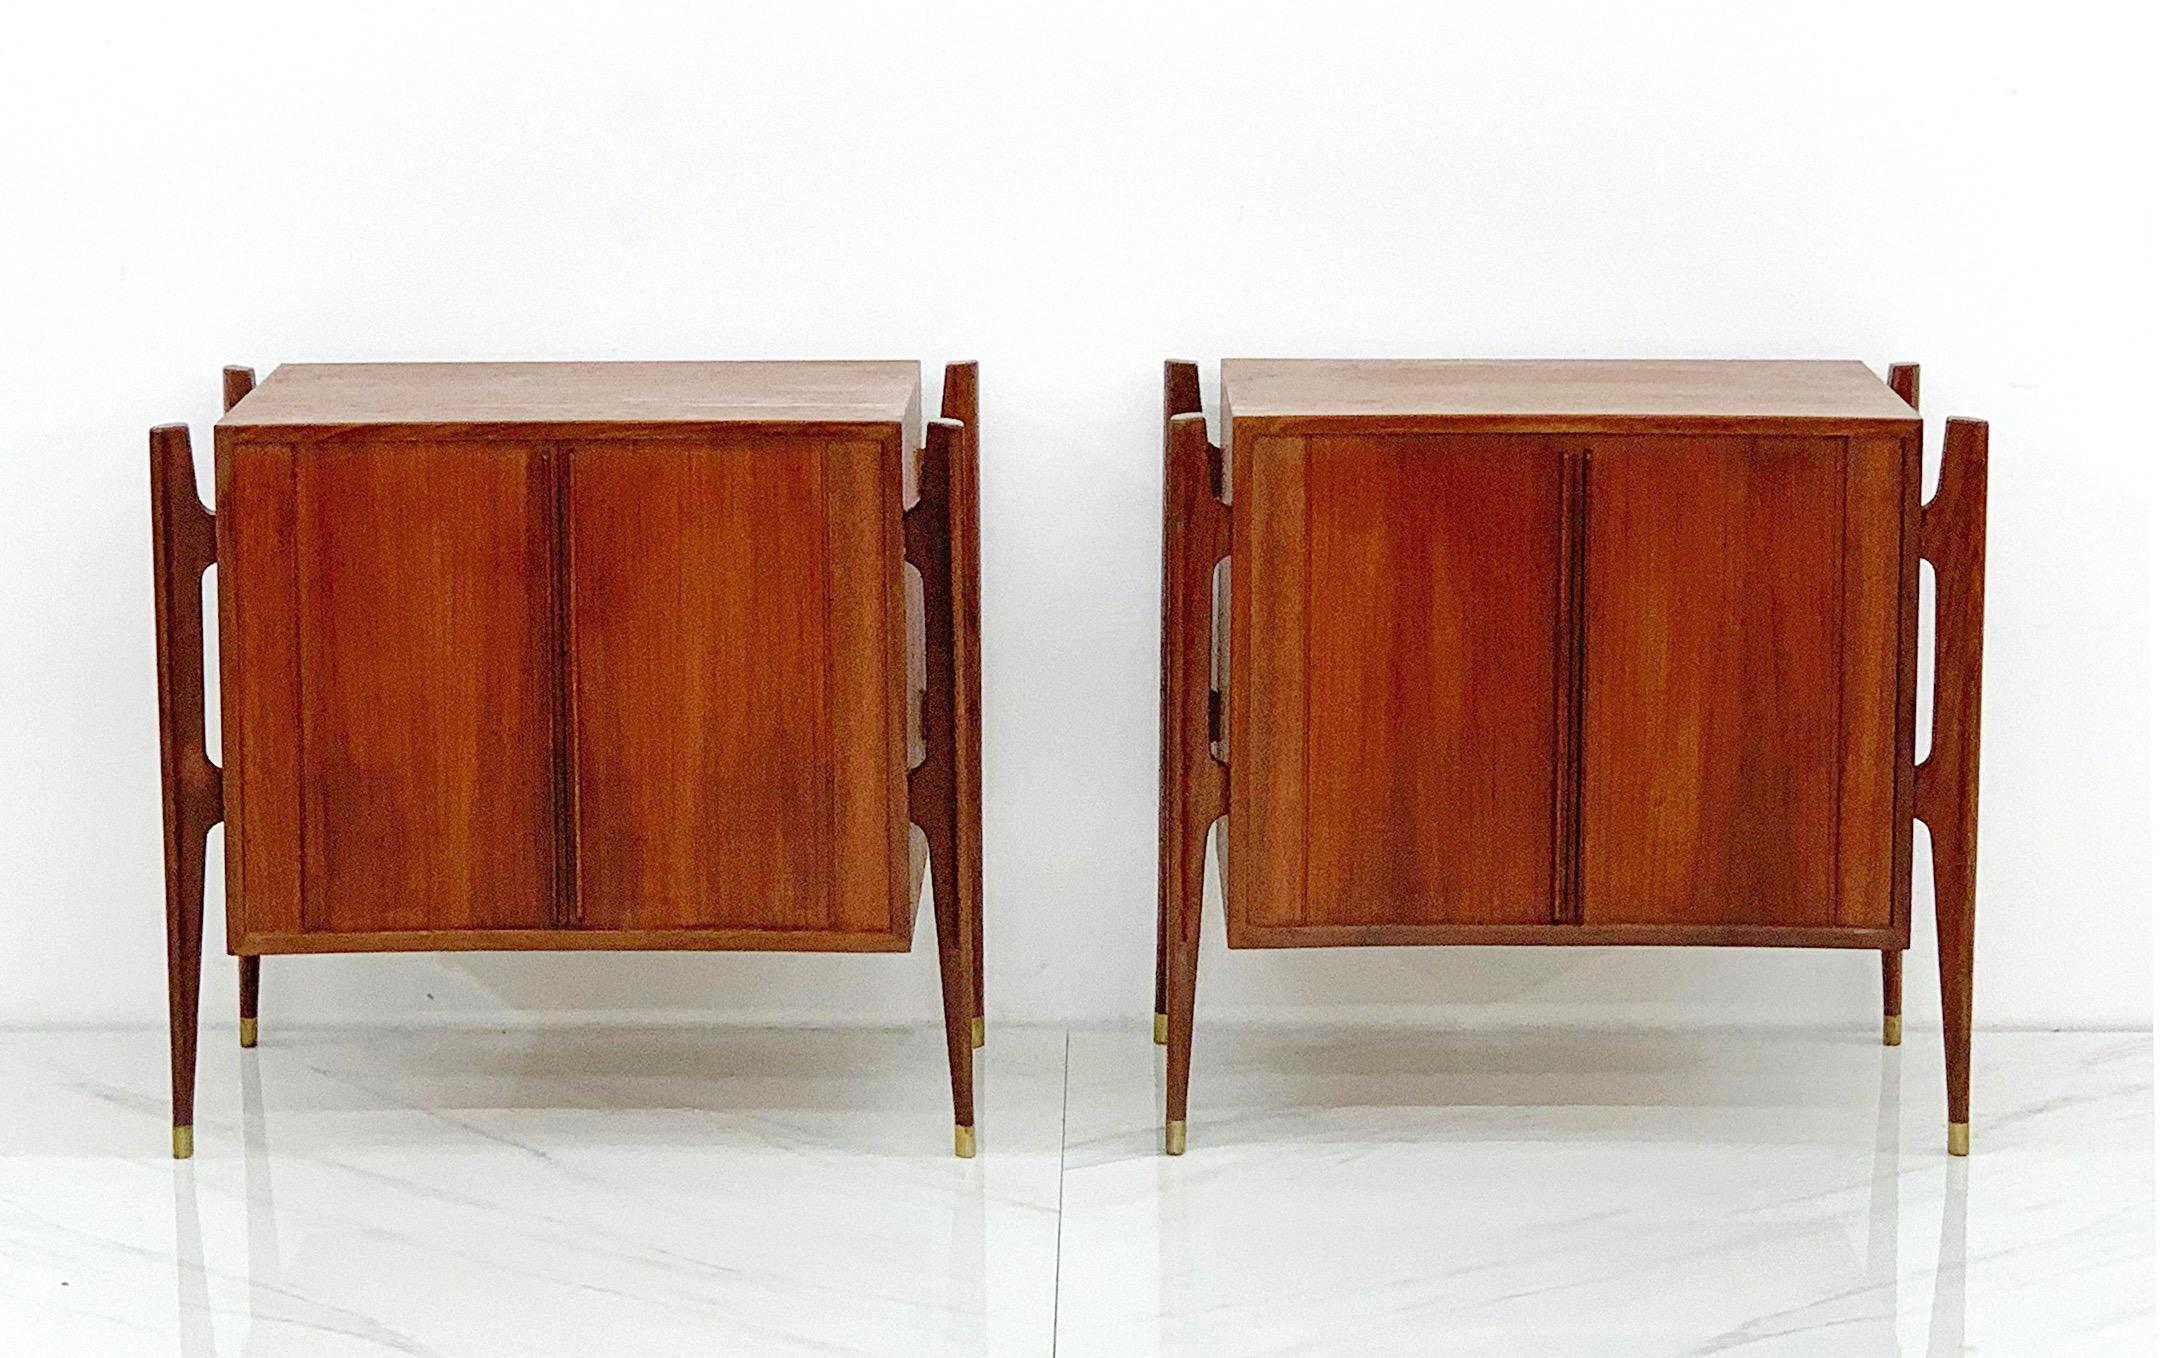 An exceptional and extremely rare pair of 1950's Mid-Century Modern nightstands, or can also be used as side or end tables, designed by Jorgen Clausen for Brande Møbelfabrik, Denmark c. 1950. Often misattributed to Edmond Spence, this gorgeous pair